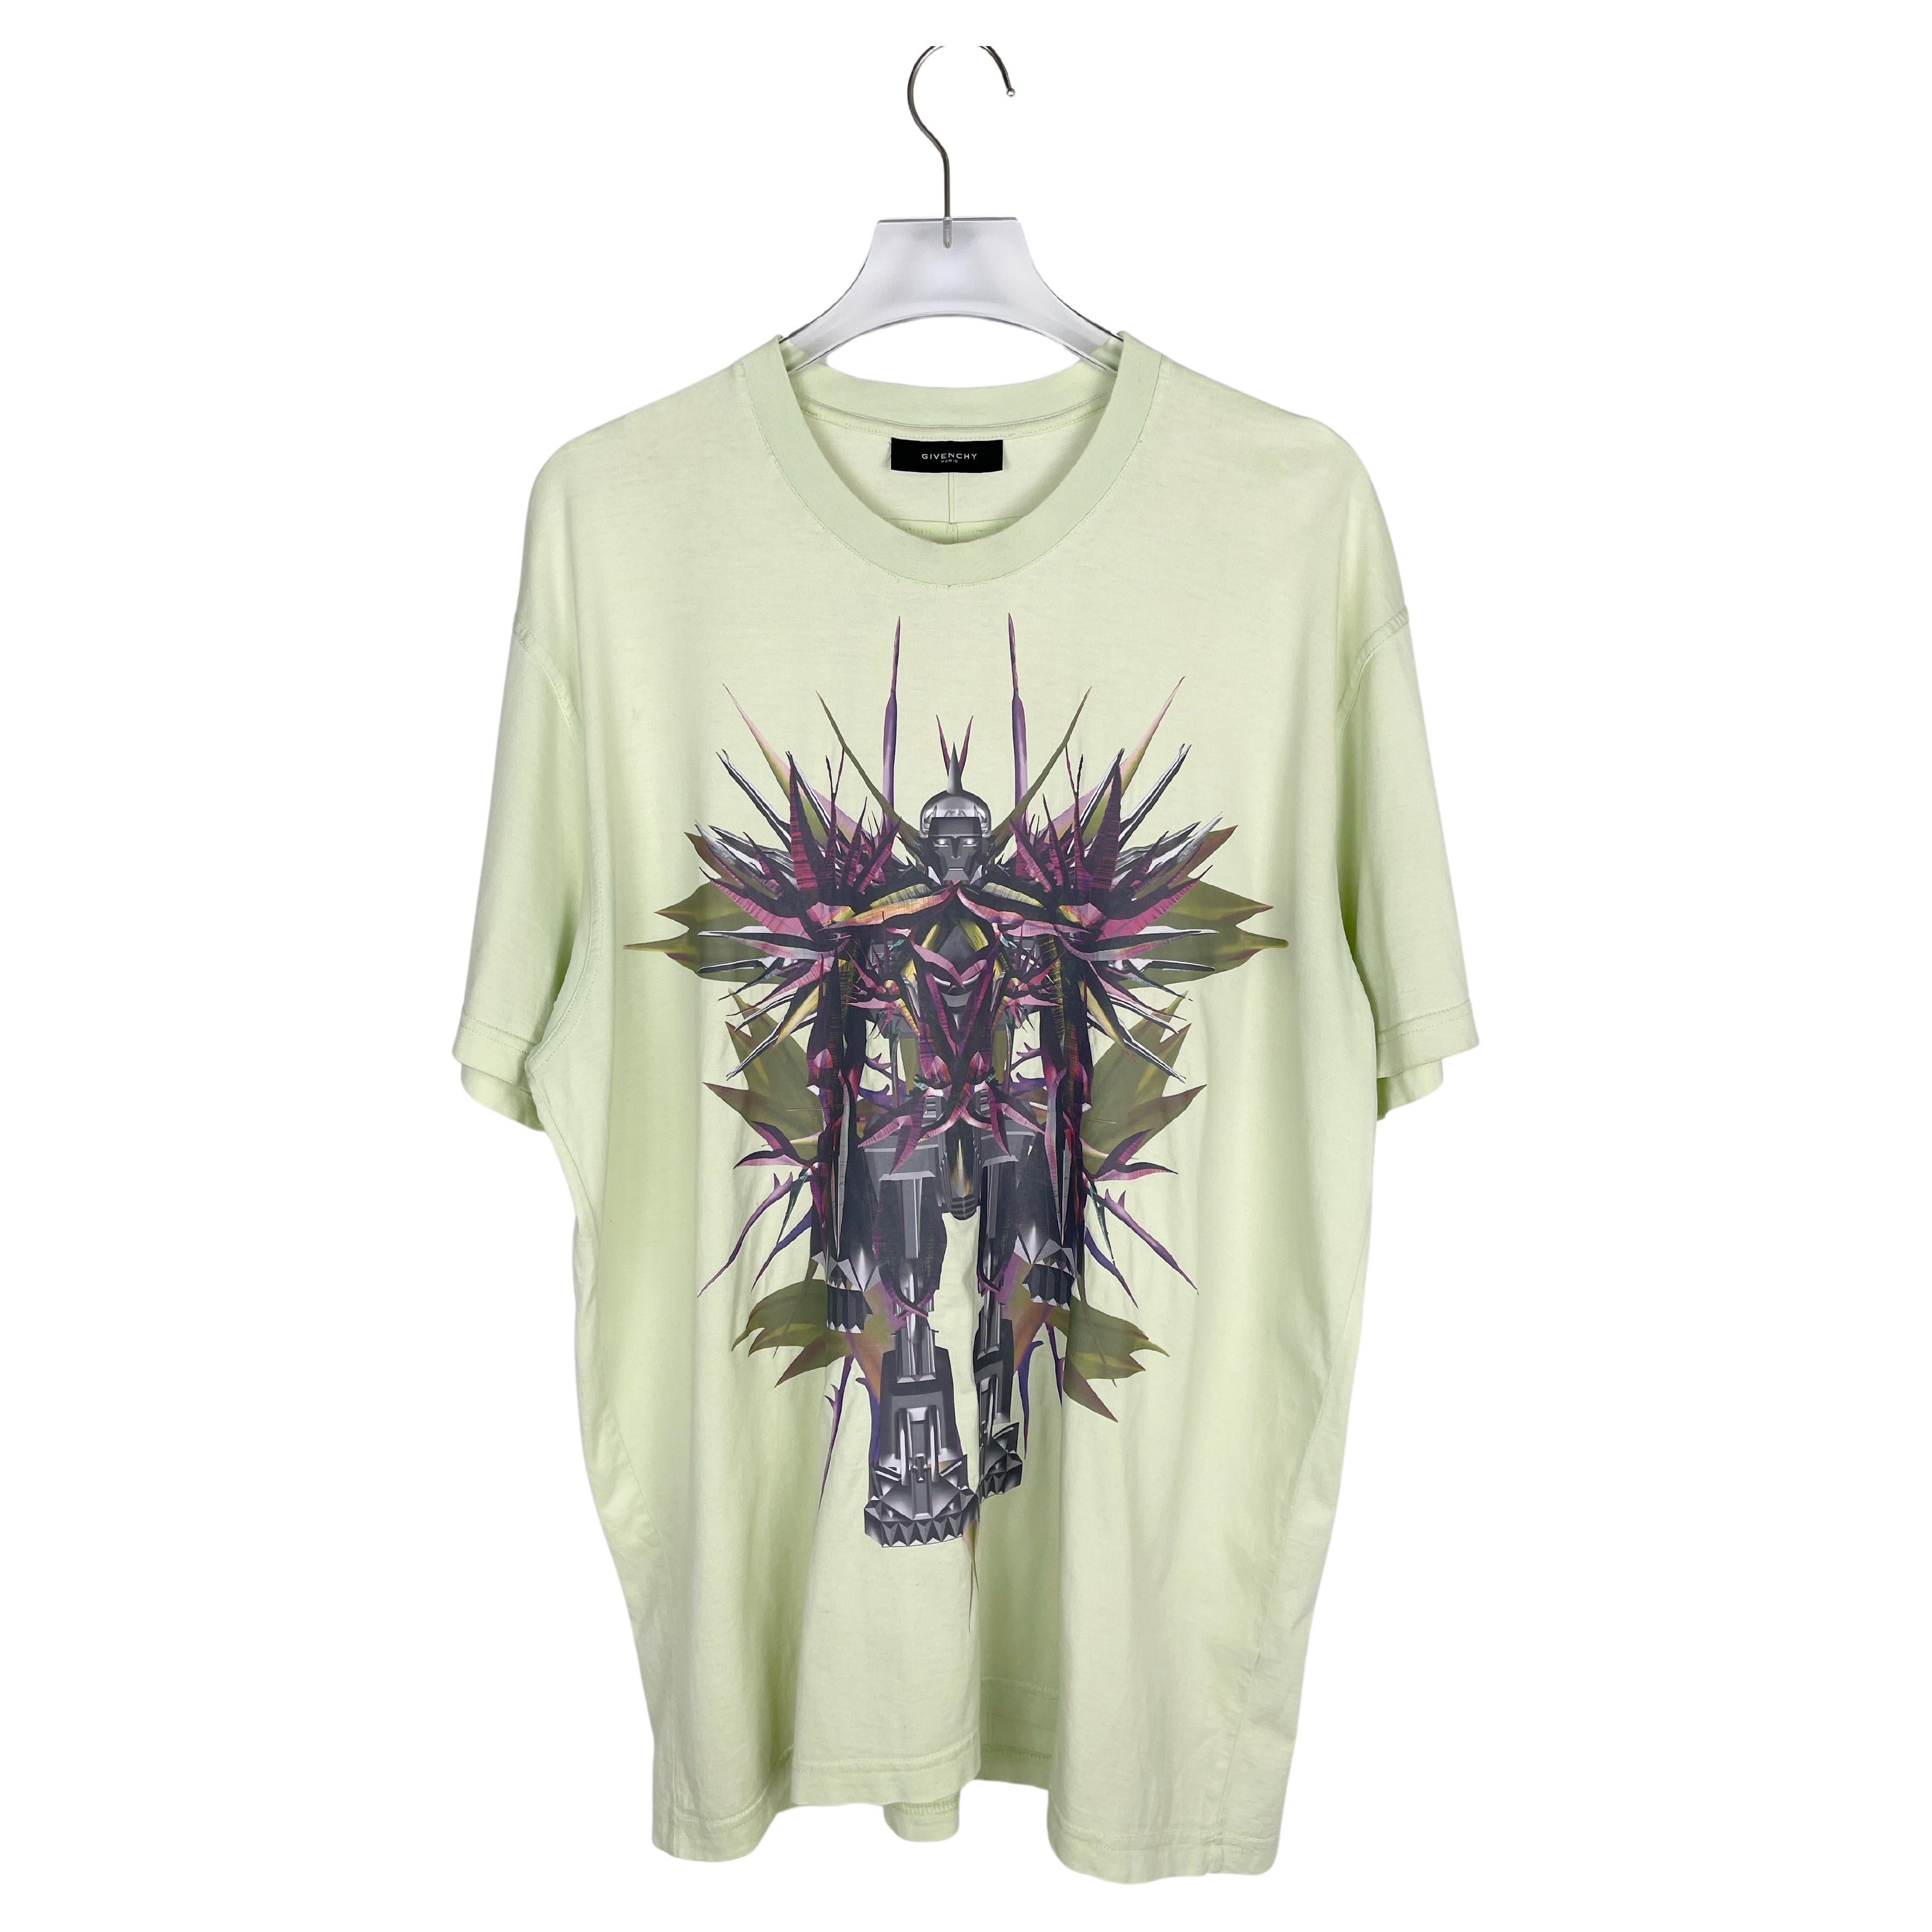 Givenchy S/S2012 "Birds Of Paradise" Robot T-Shirt